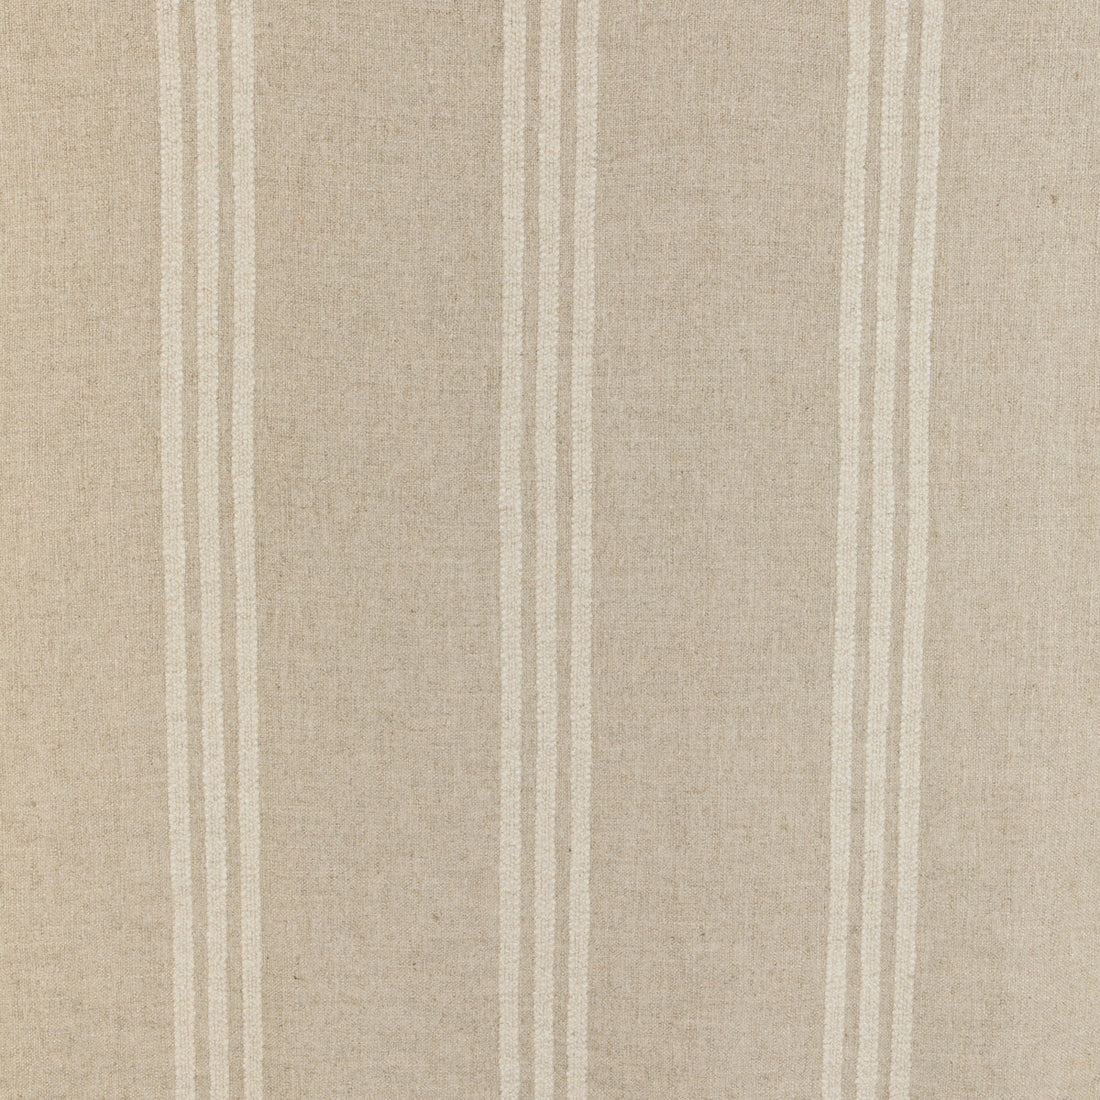 Karphi Stripe fabric in flax color - pattern 35860.16.0 - by Kravet Couture in the Atelier Weaves collection